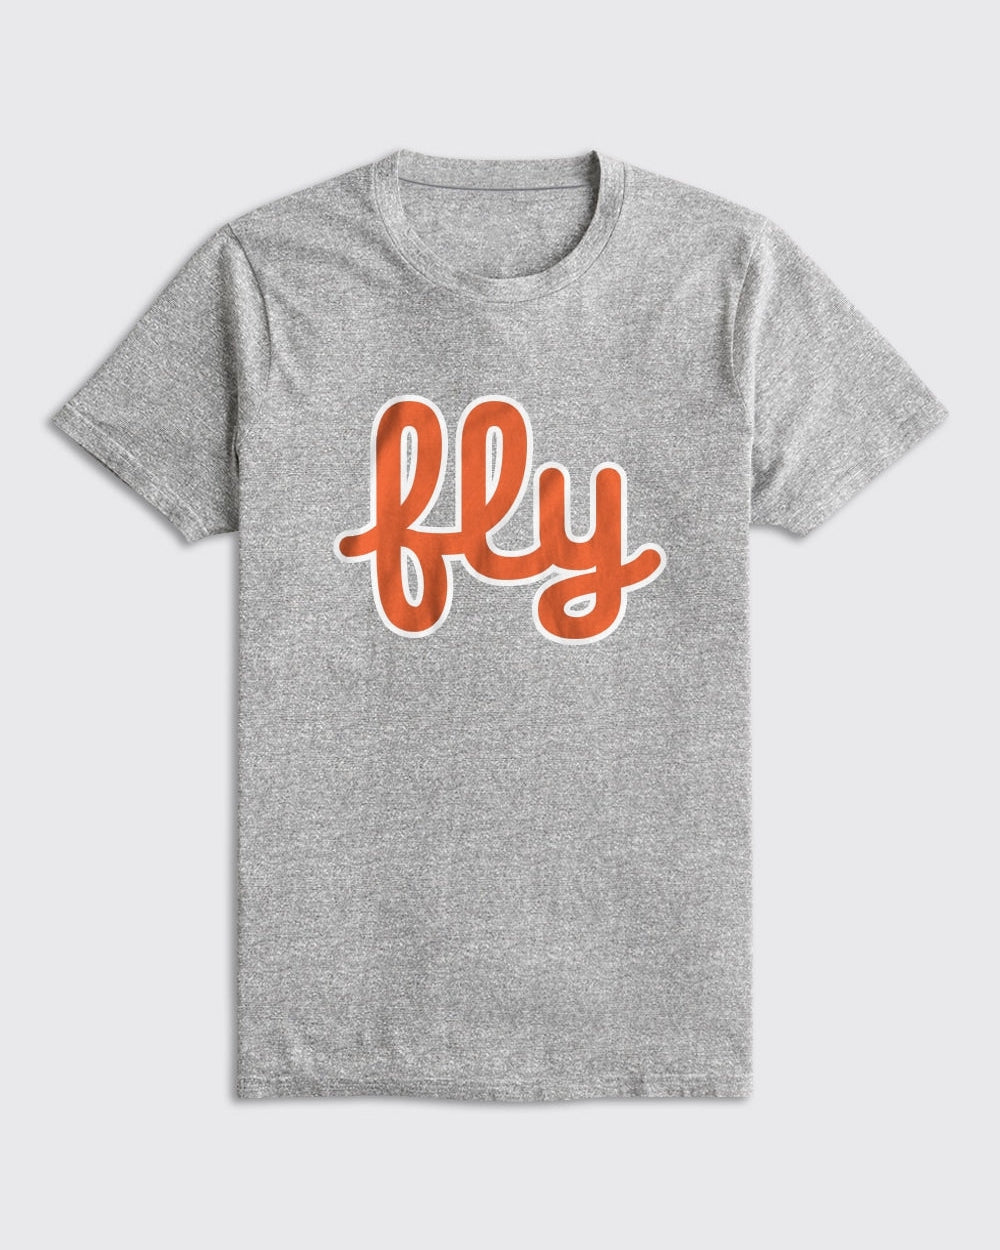 Flyers Fly Shirt - Flyers, T-Shirts - Philly Sports Shirts